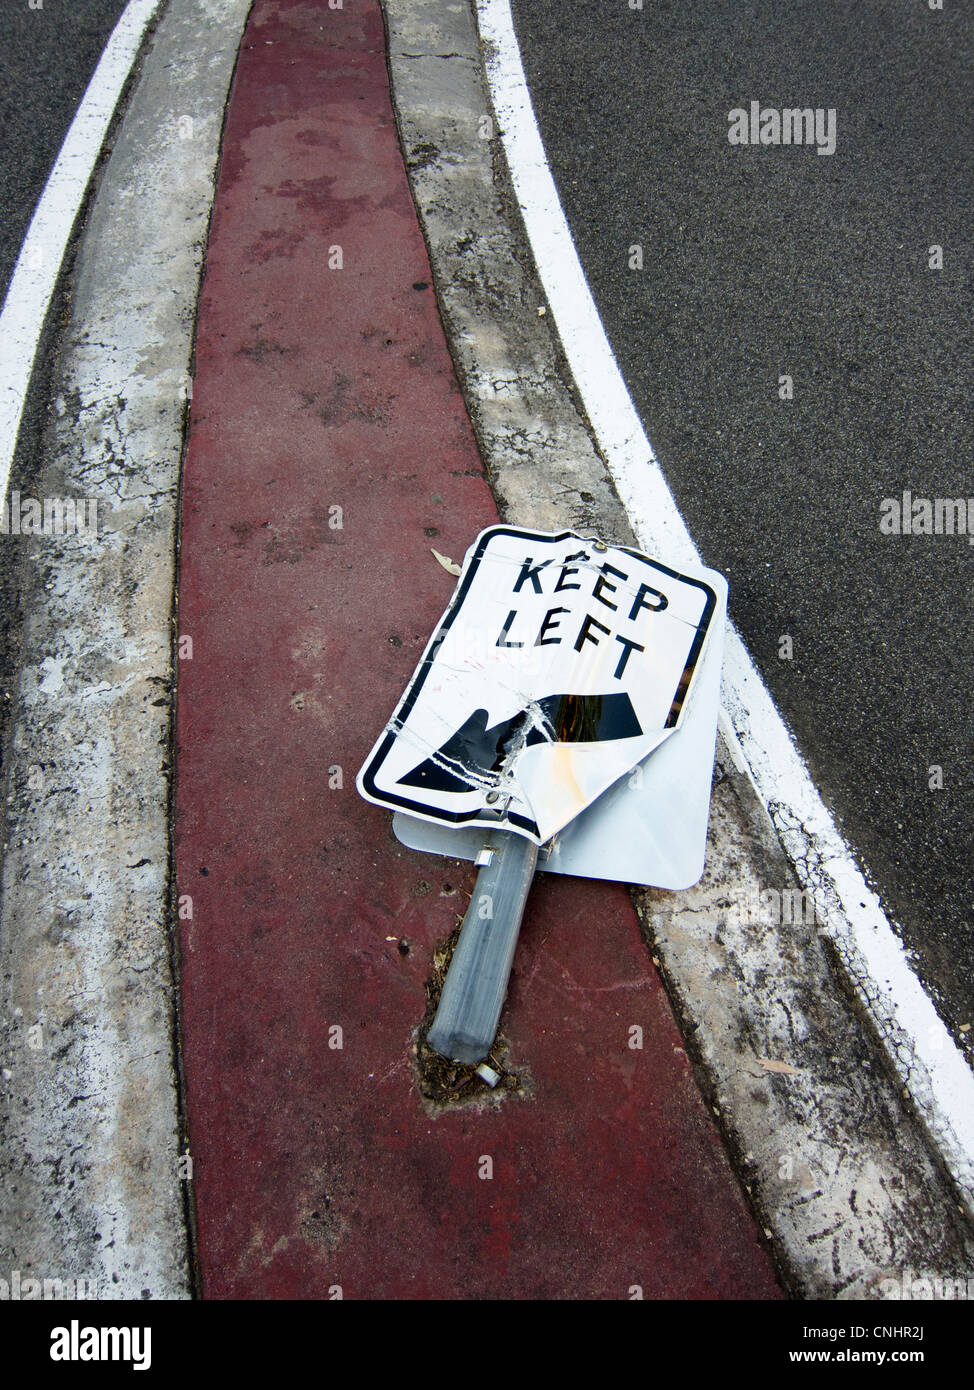 A flattened Keep Left road sign Stock Photo